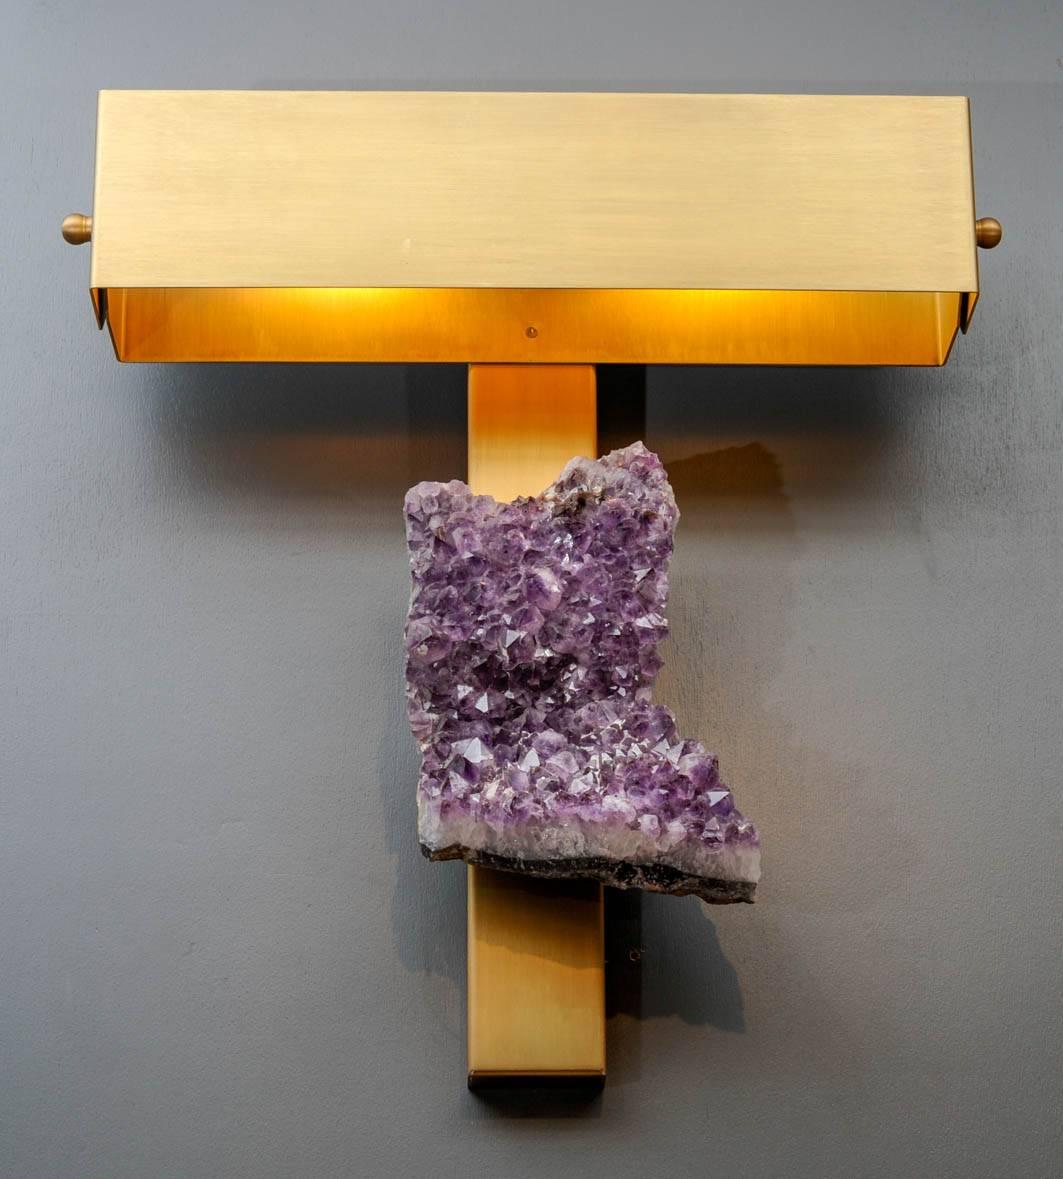 Pair of wall sconces made of a long brass backplate, supporting a large amethyst stone under a rectangular shade.